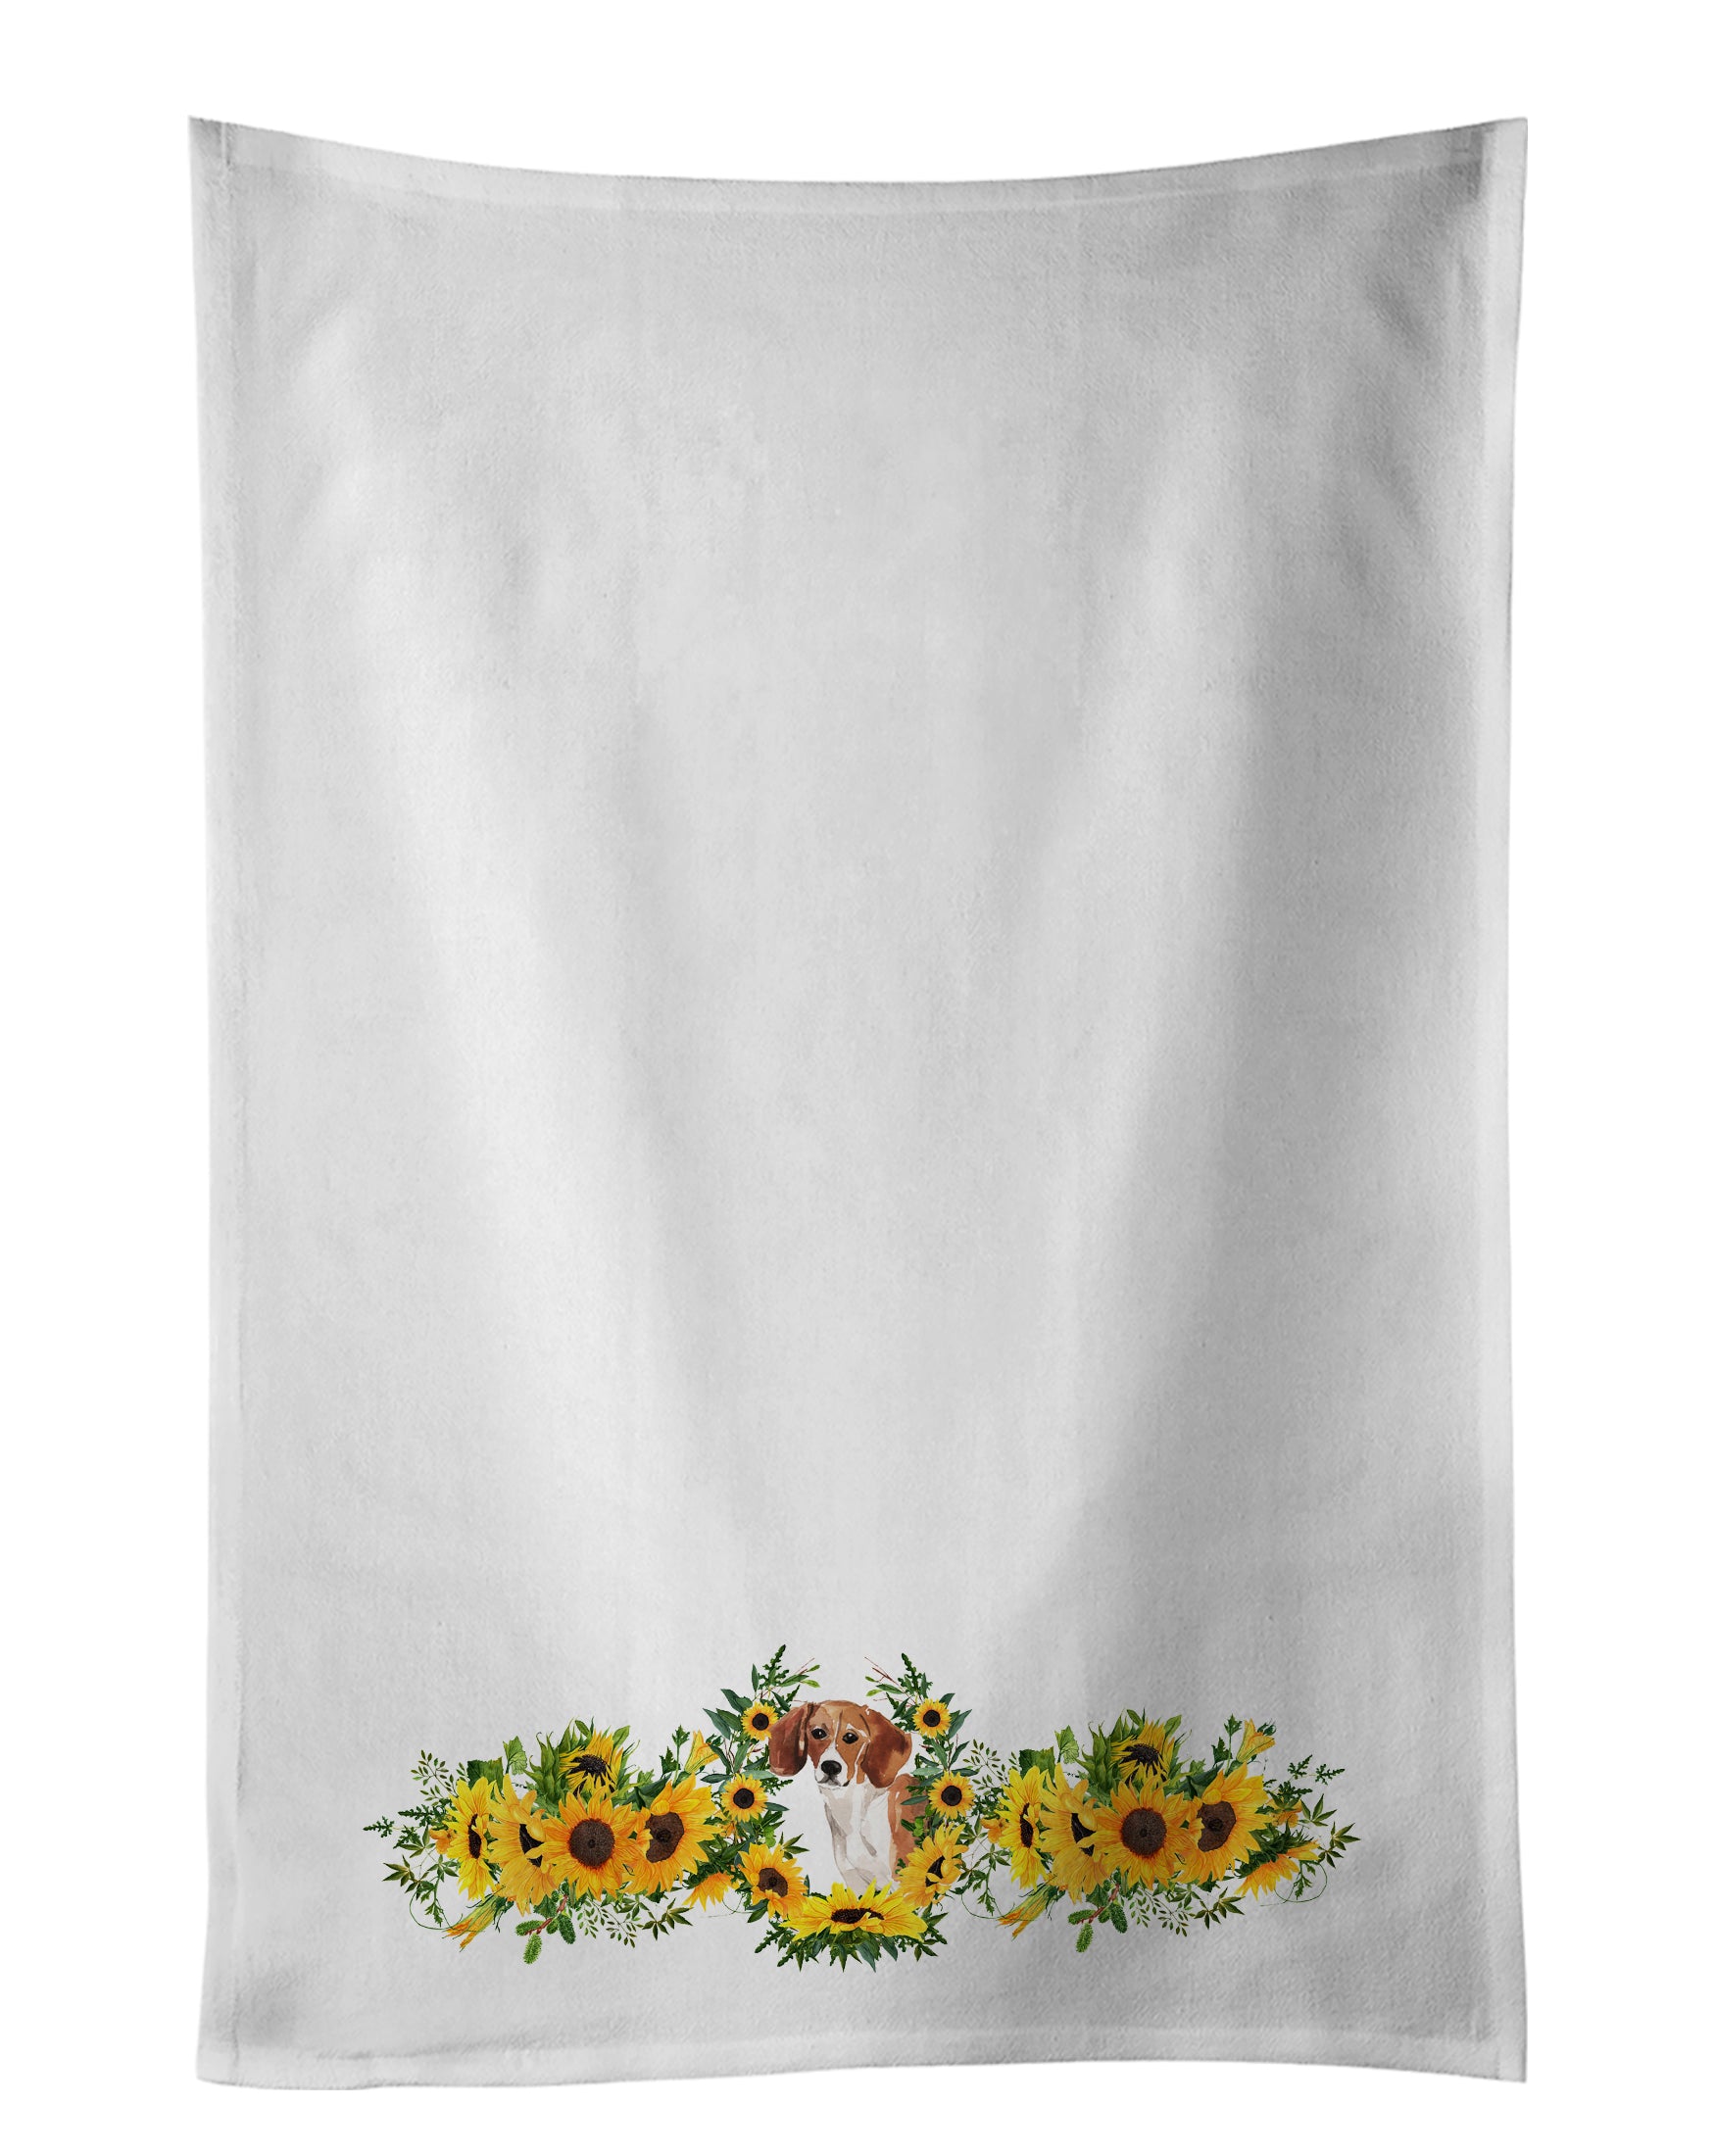 Buy this Beagle in Sunflowers White Kitchen Towel Set of 2